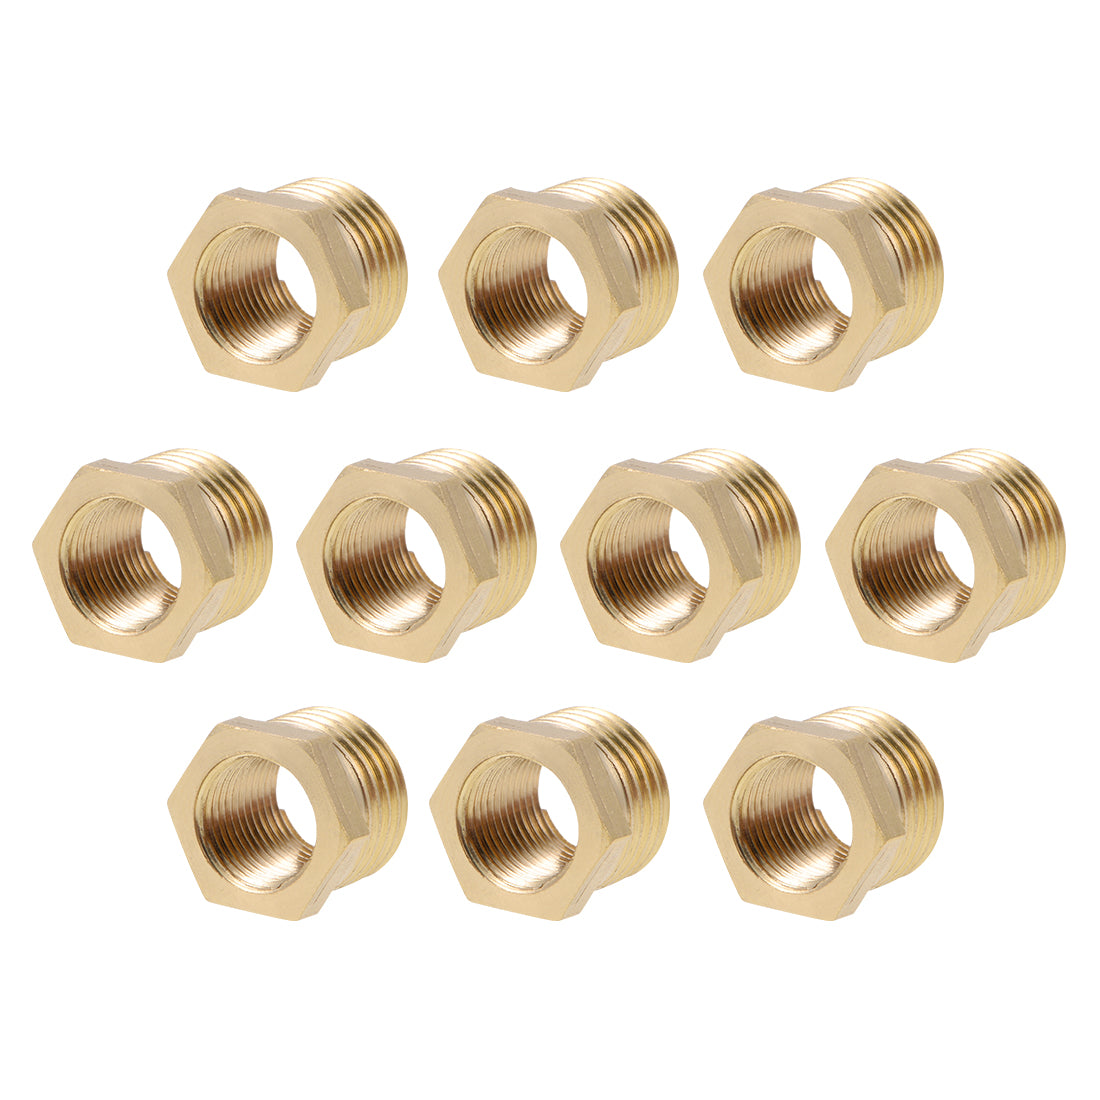 uxcell Uxcell Brass Threaded Pipe Fitting G1/4 Male x G1/8 Female Hex Bushing Adapter 10pcs